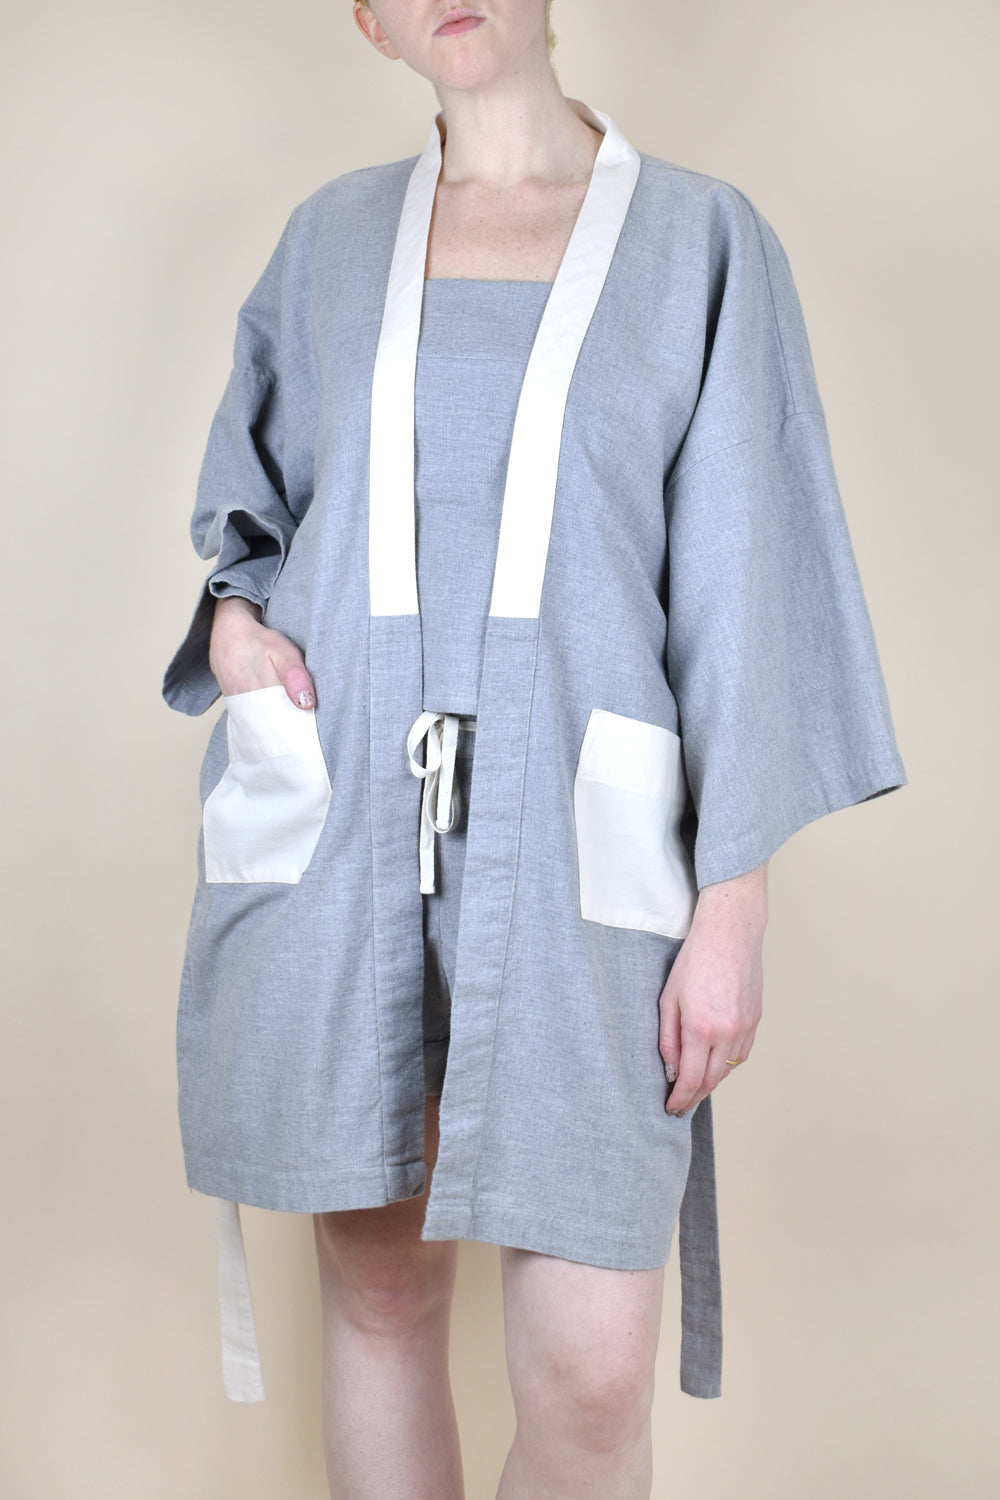 That's A Wrap robe sewing pattern by Forest and Thread